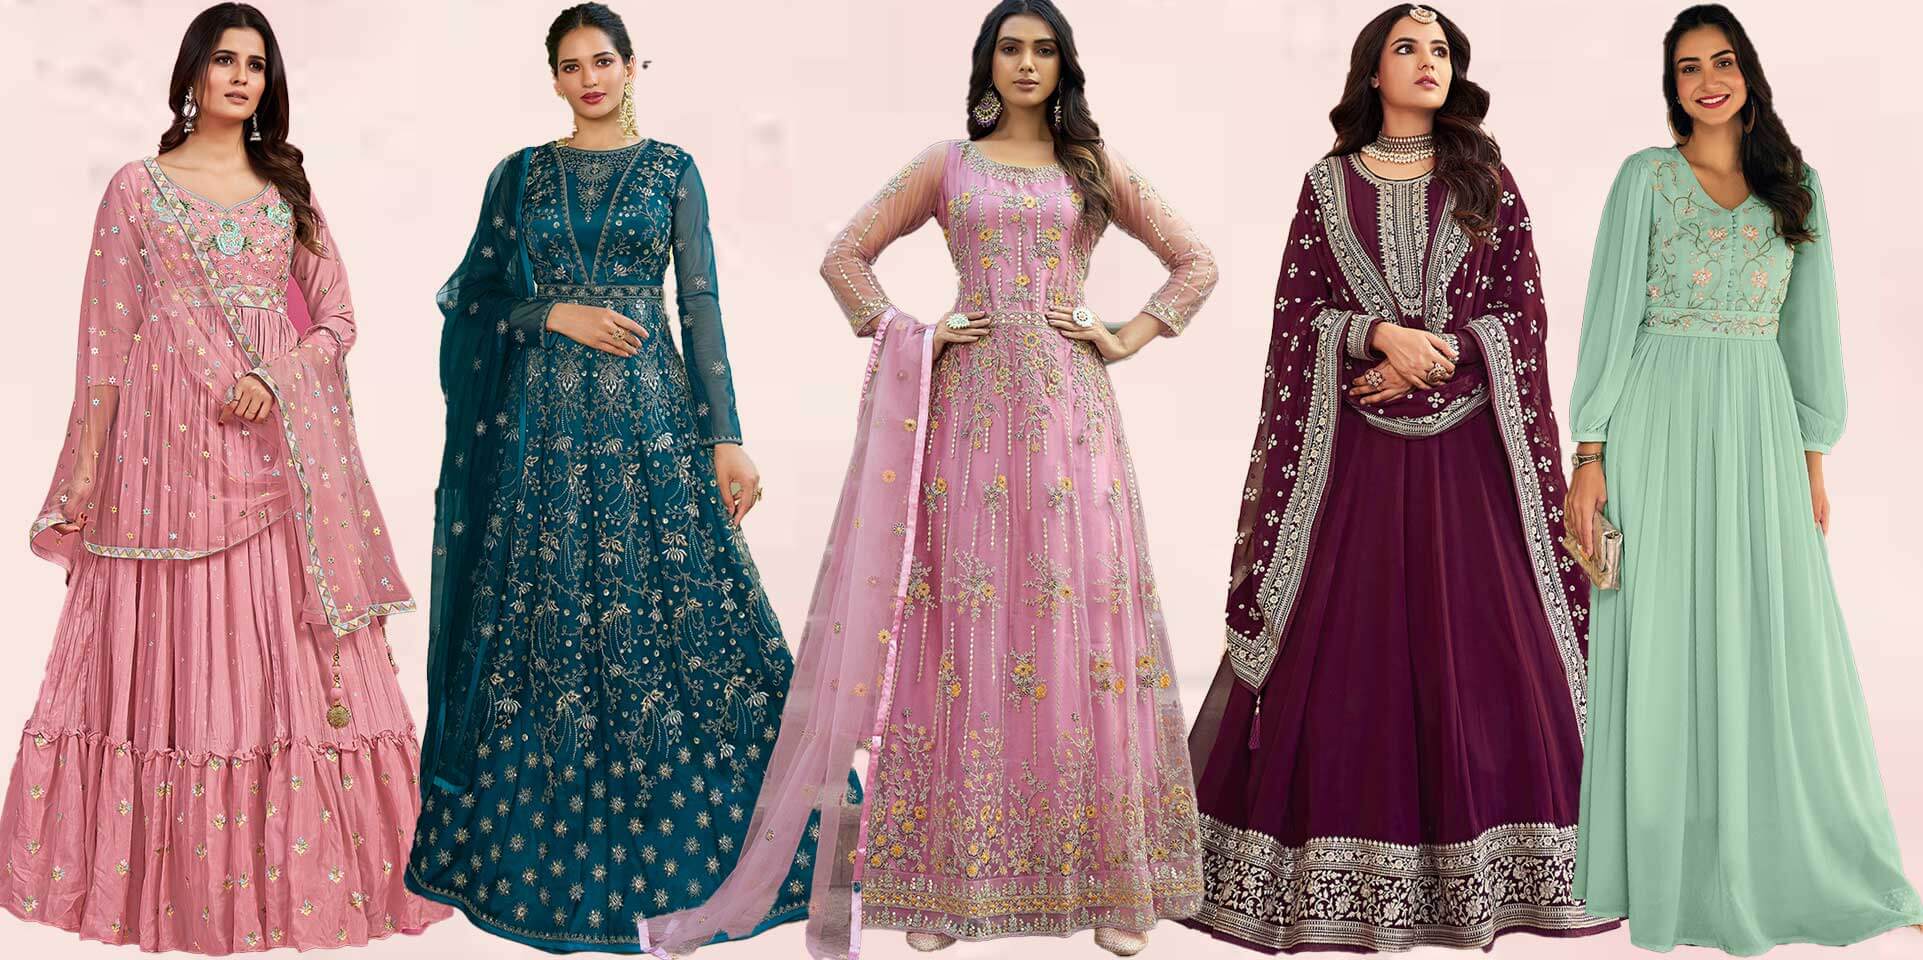 Best Anarkali Suits Shopping Guide in the USA